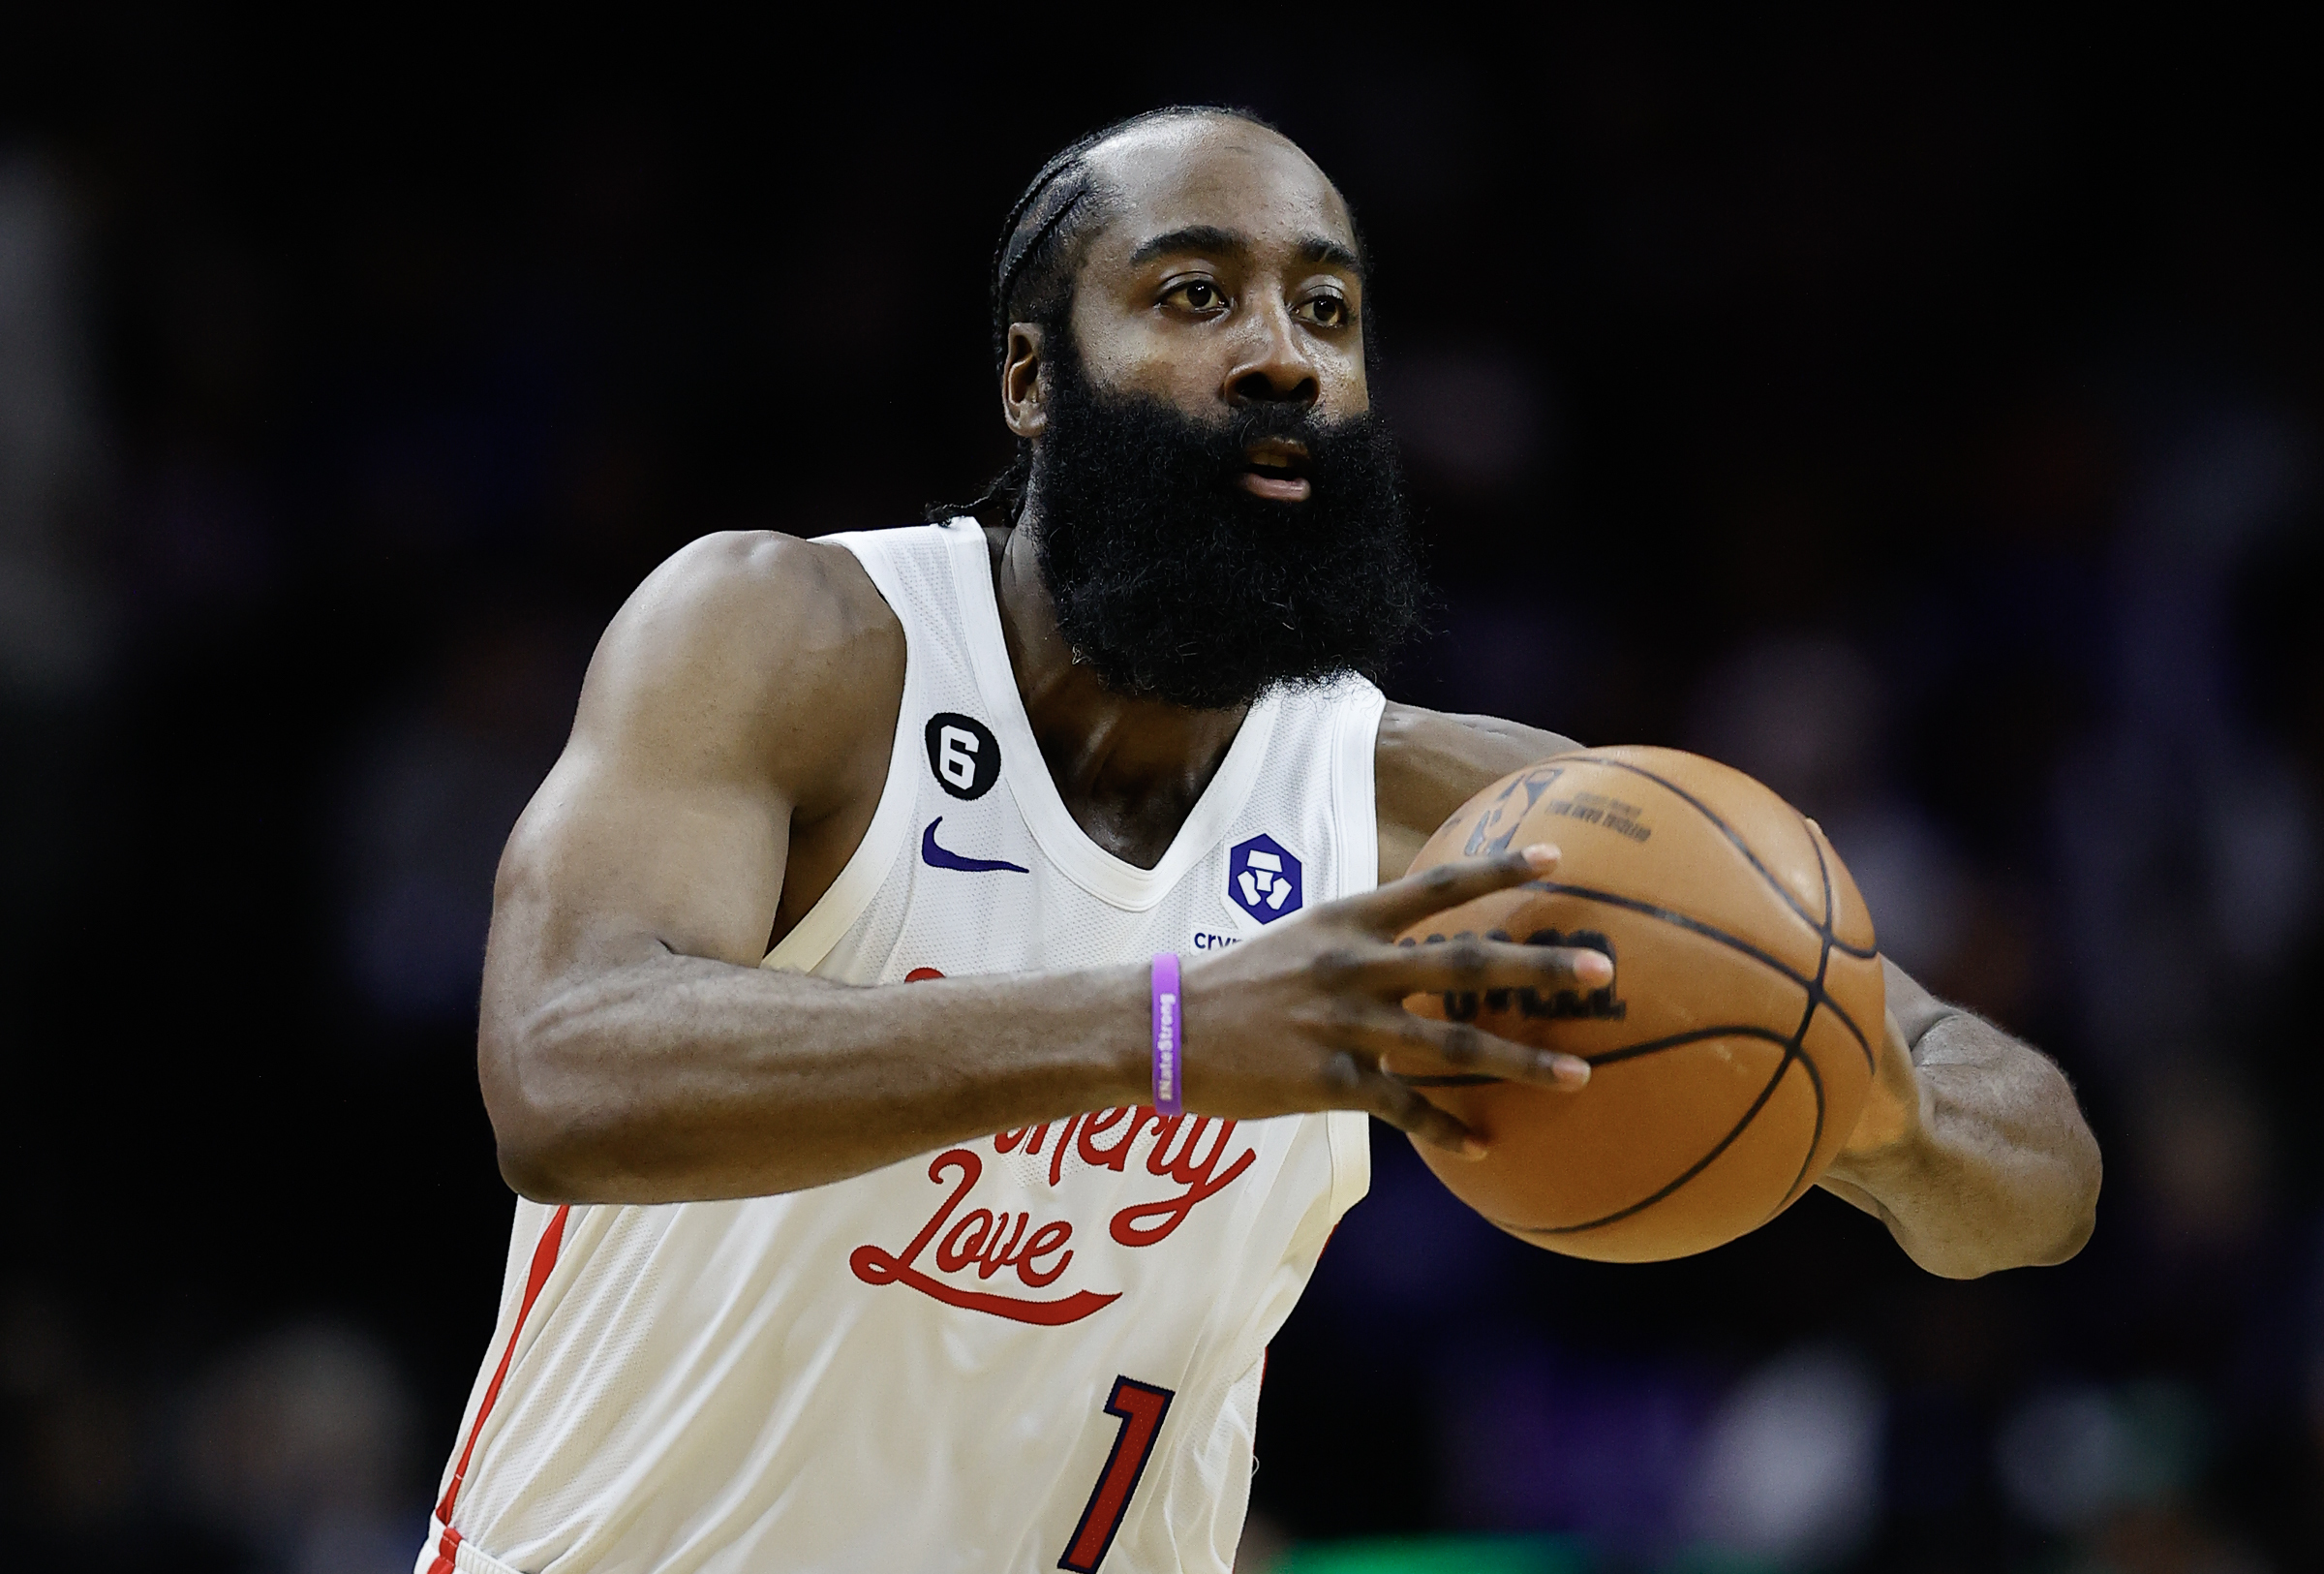 Daryl Morey holding firm despite James Harden's comments?